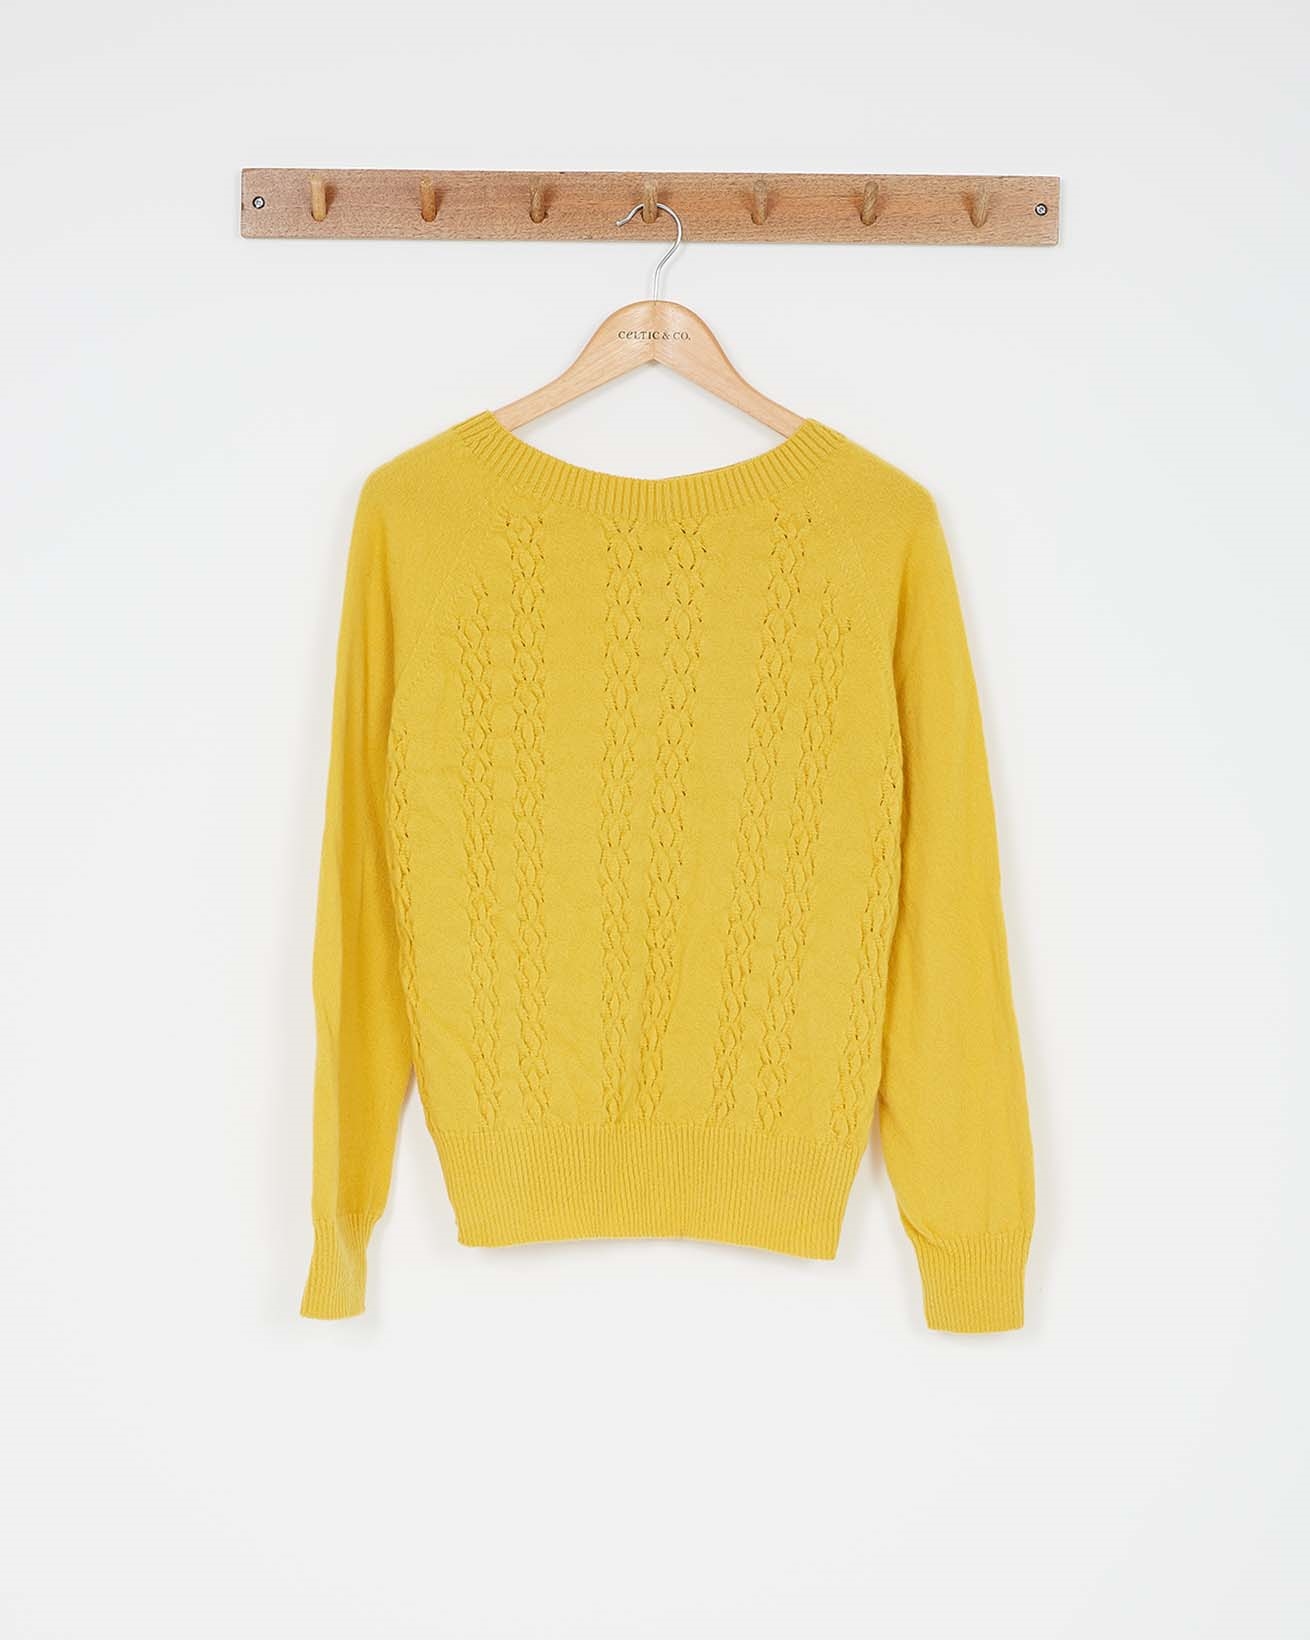 2943-supersoft-crew-neck-cable-butter.jpg